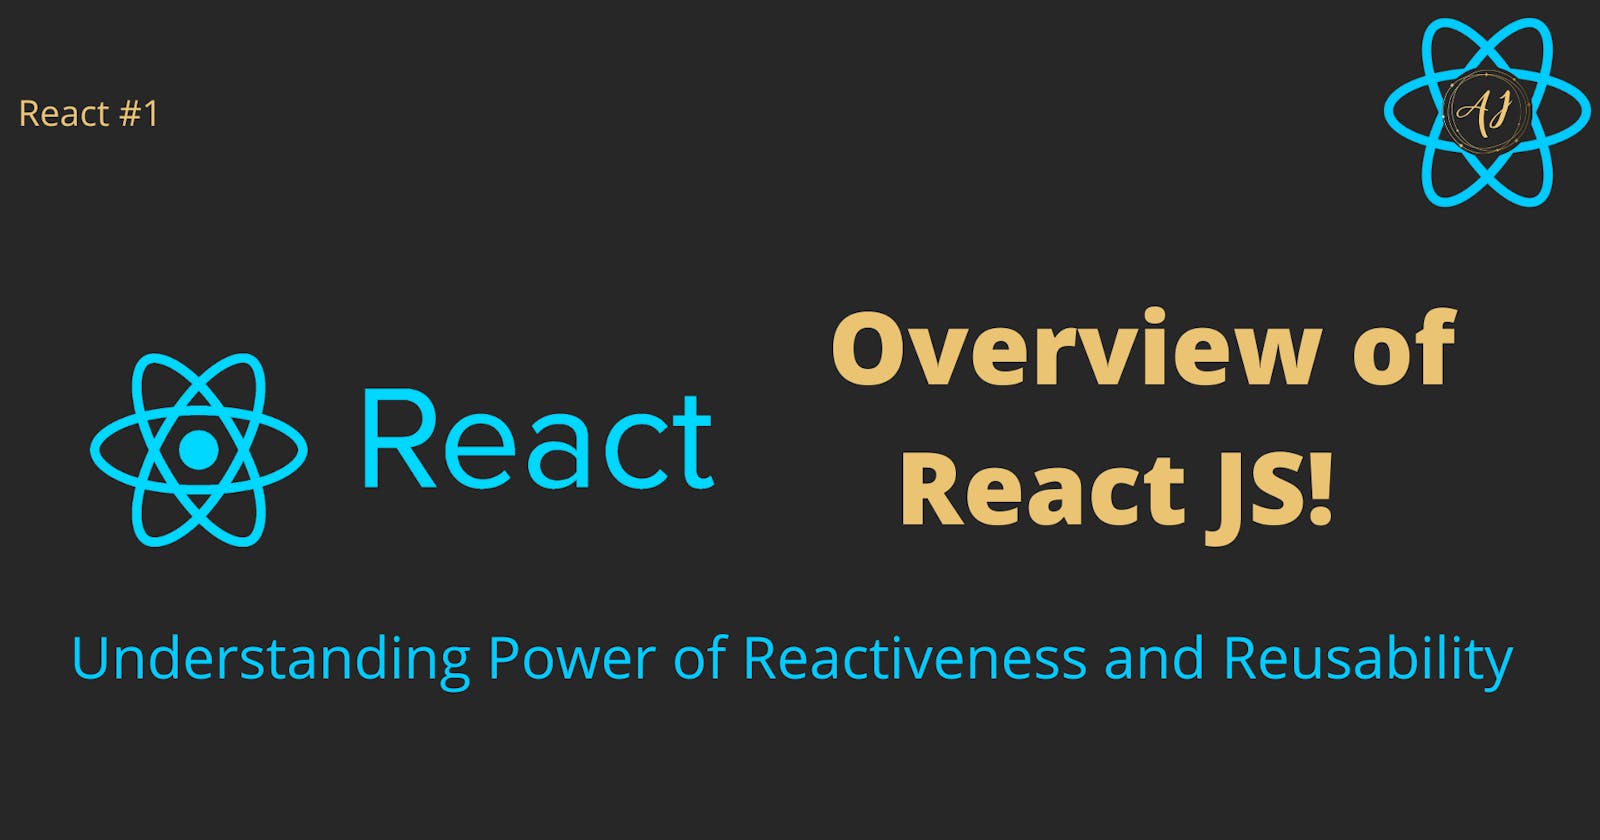 Overview of React JS!